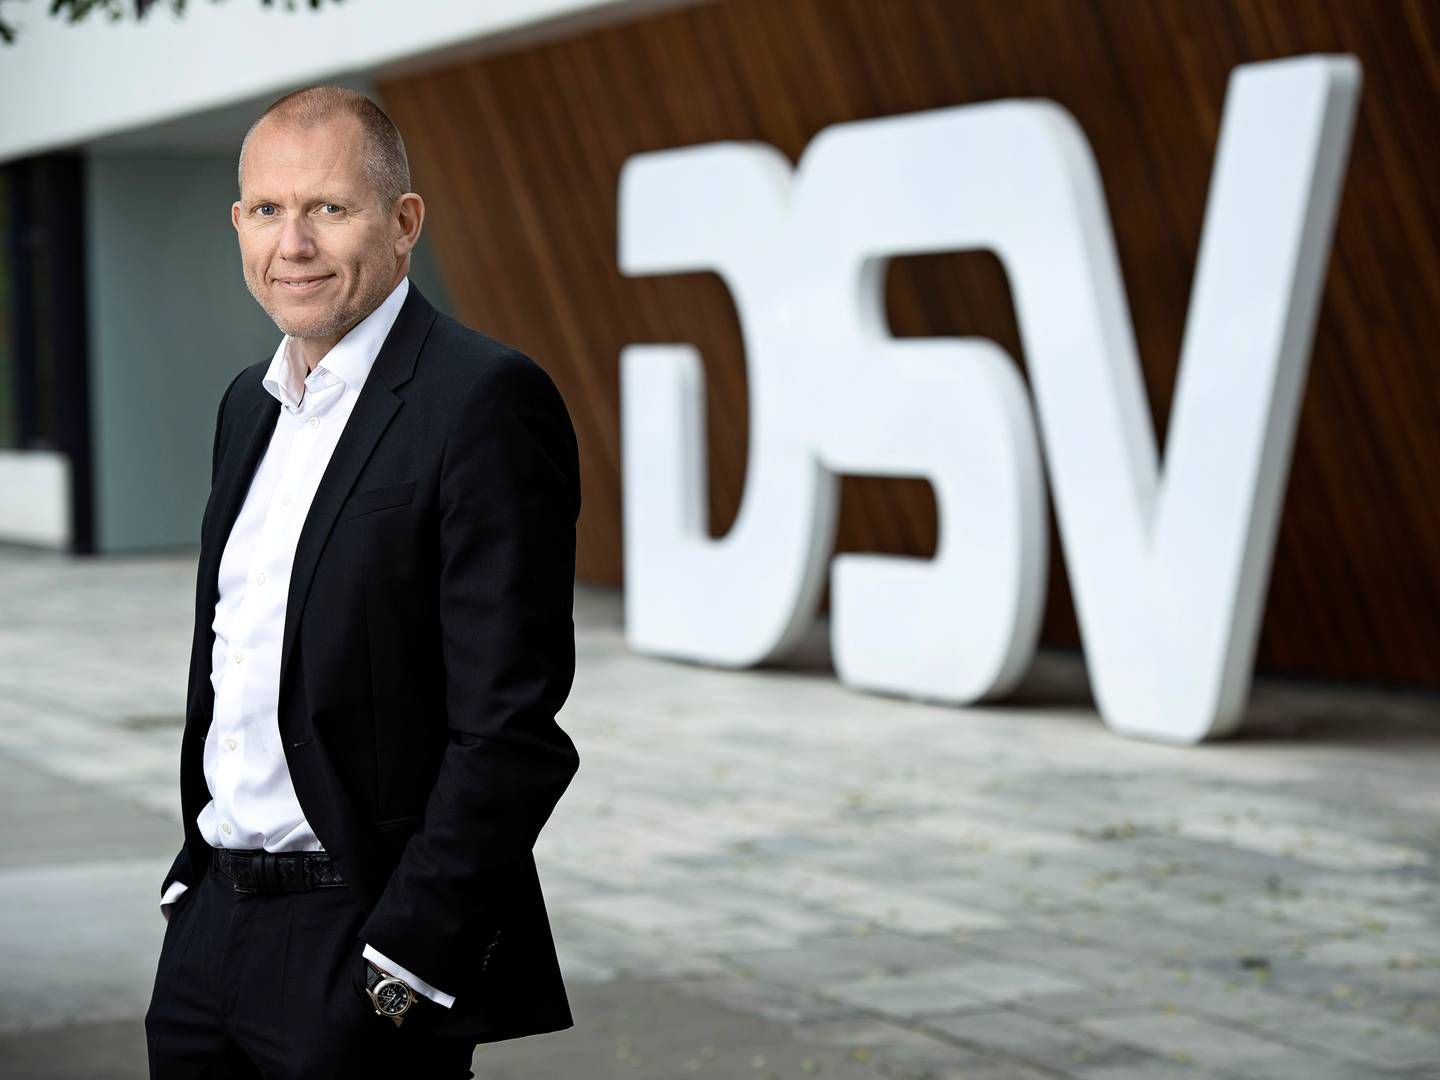 "Through complex acquisitions, large integrations and challenging markets, we have managed to support our customers, create value for our shareholders," writes DSV's CEO, Jens Bjørn Andersen, about his time at DSV. | Photo: Dsv / Pr